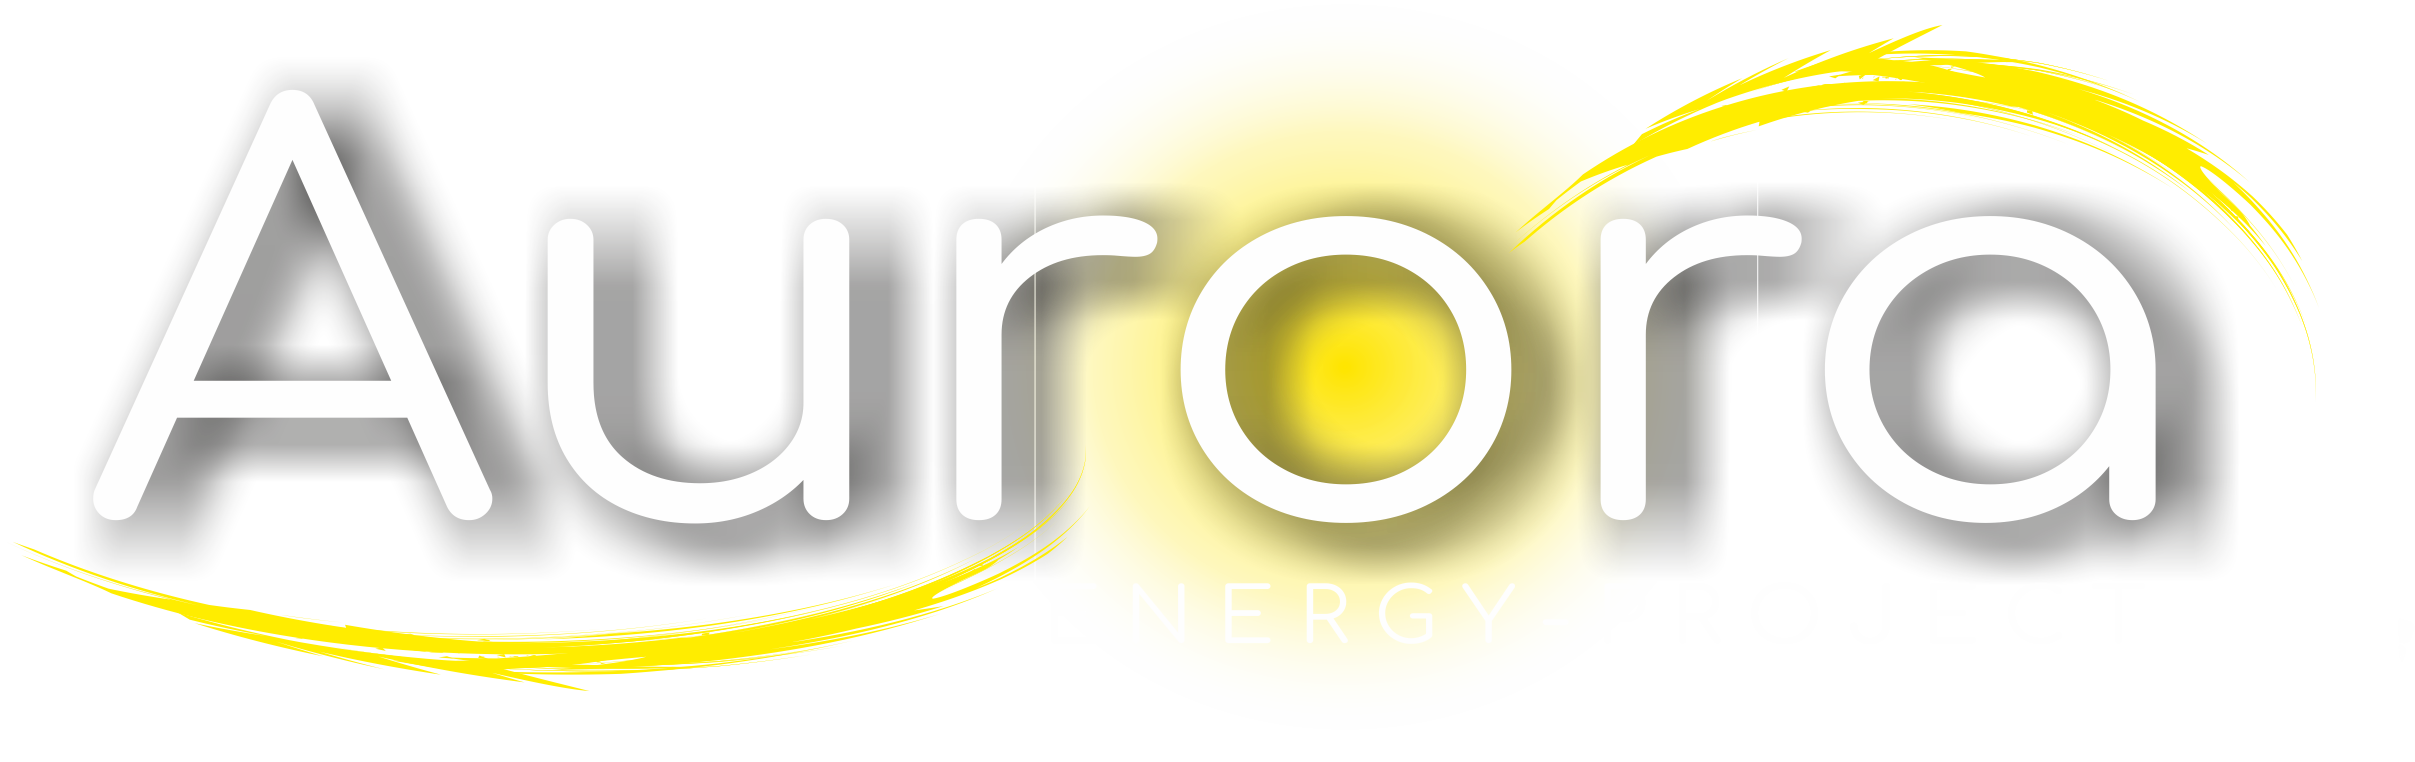 home-aurora-energy-project-s-r-l